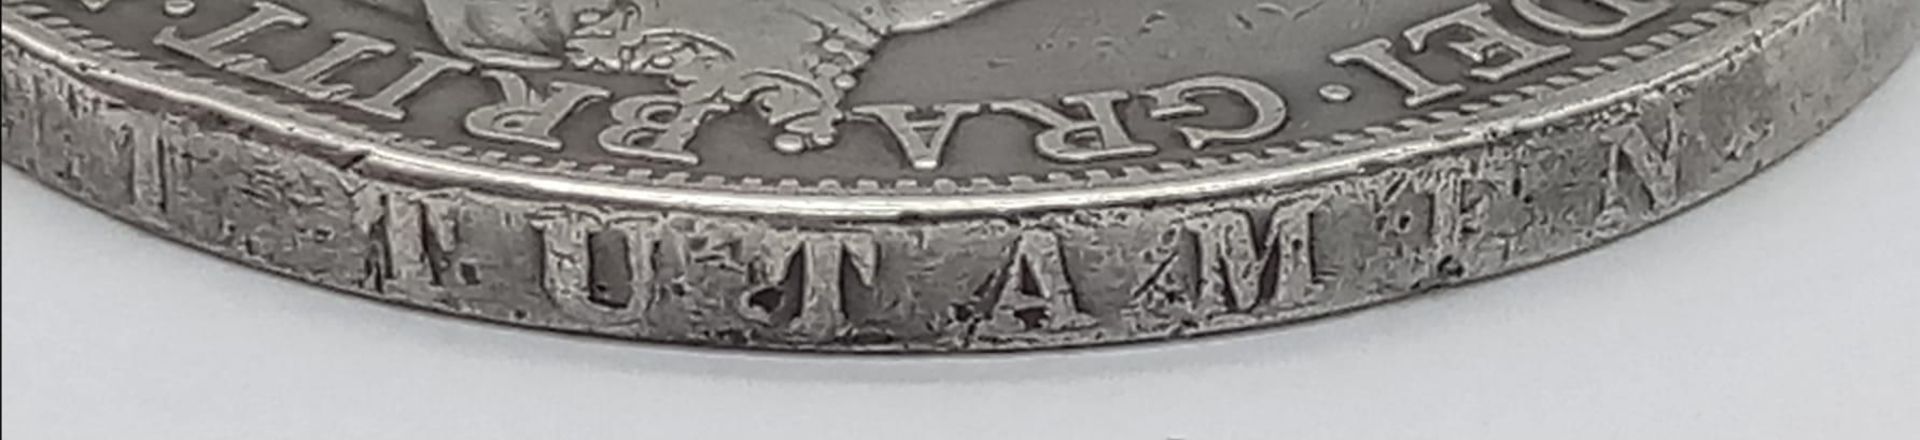 An 1896 Queen Victoria Silver Crown. Please see photos for conditions. - Image 6 of 6